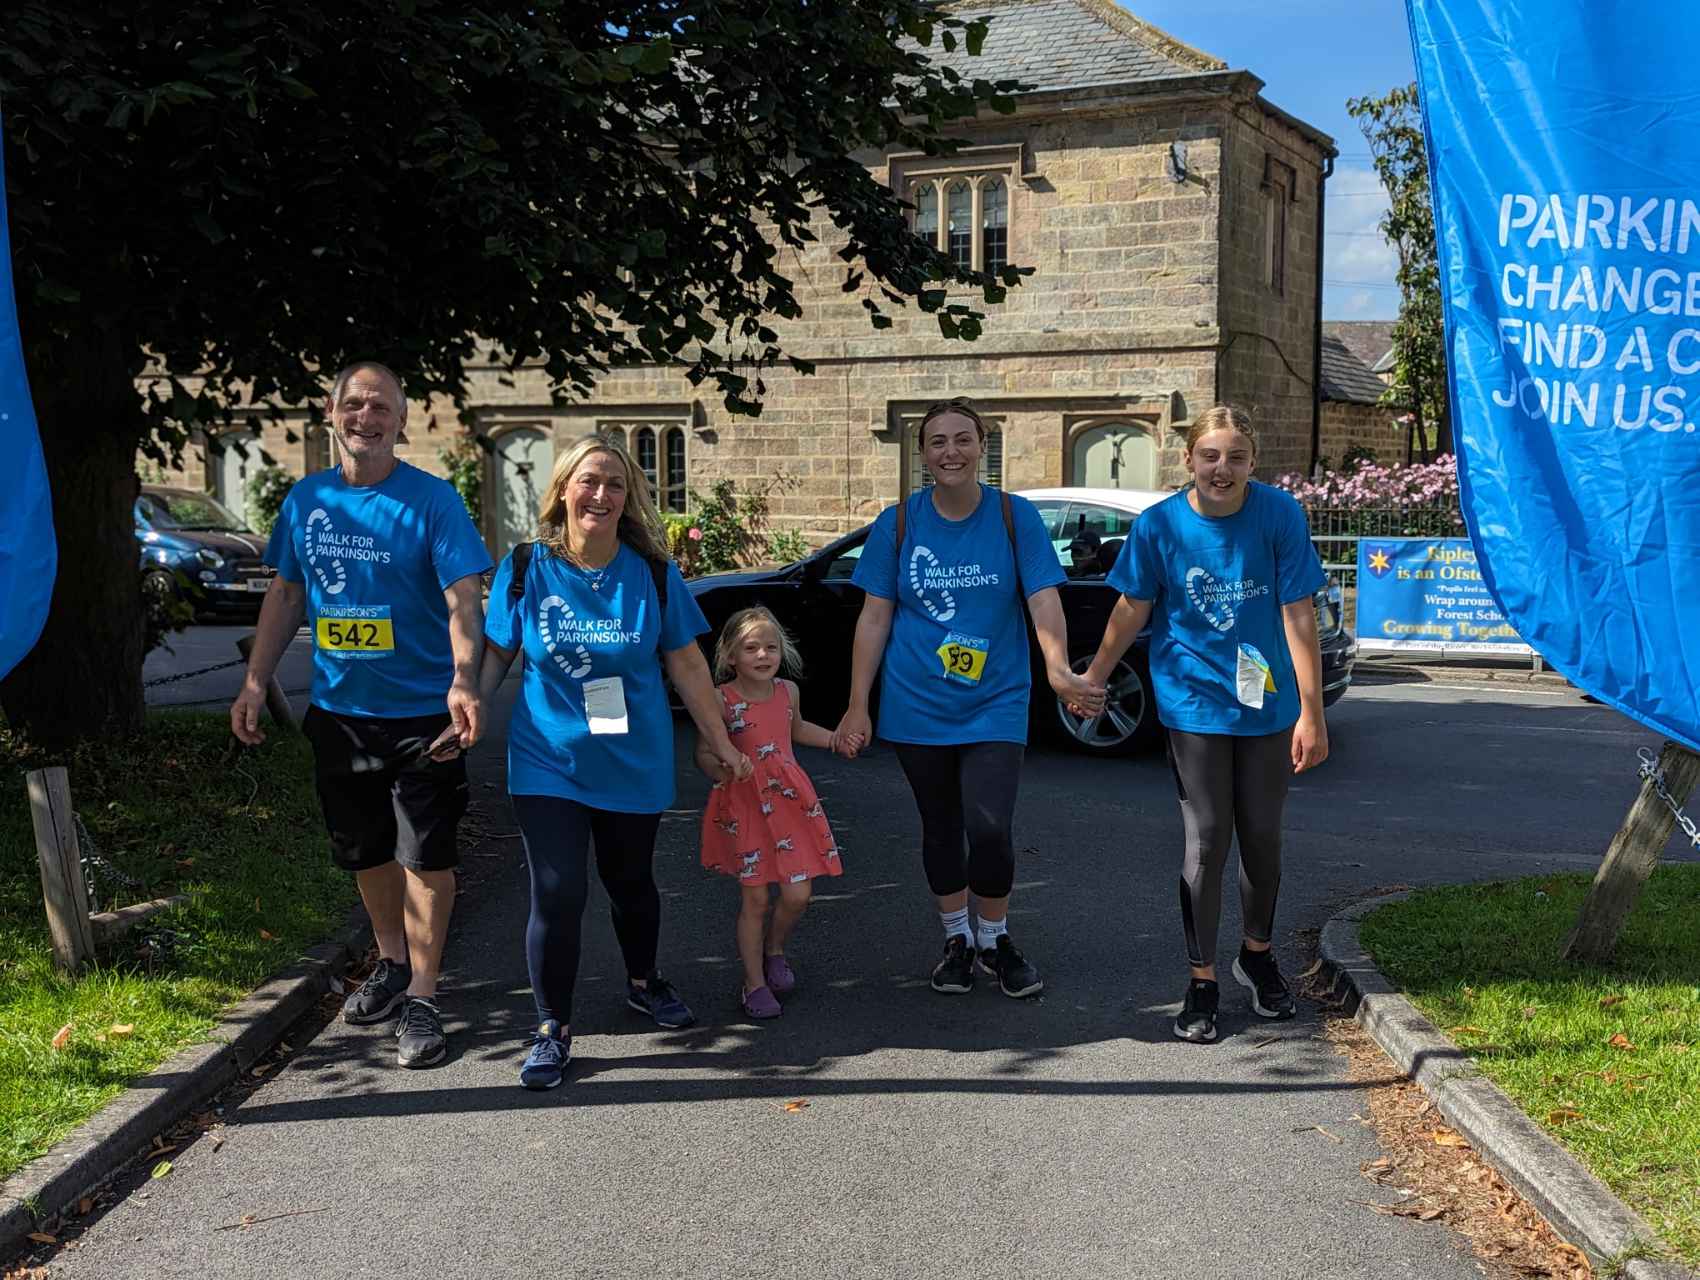 138 walkers took part in their local Walk for Parkinson’s event from the Star Club in Ripley on 3 September 2023